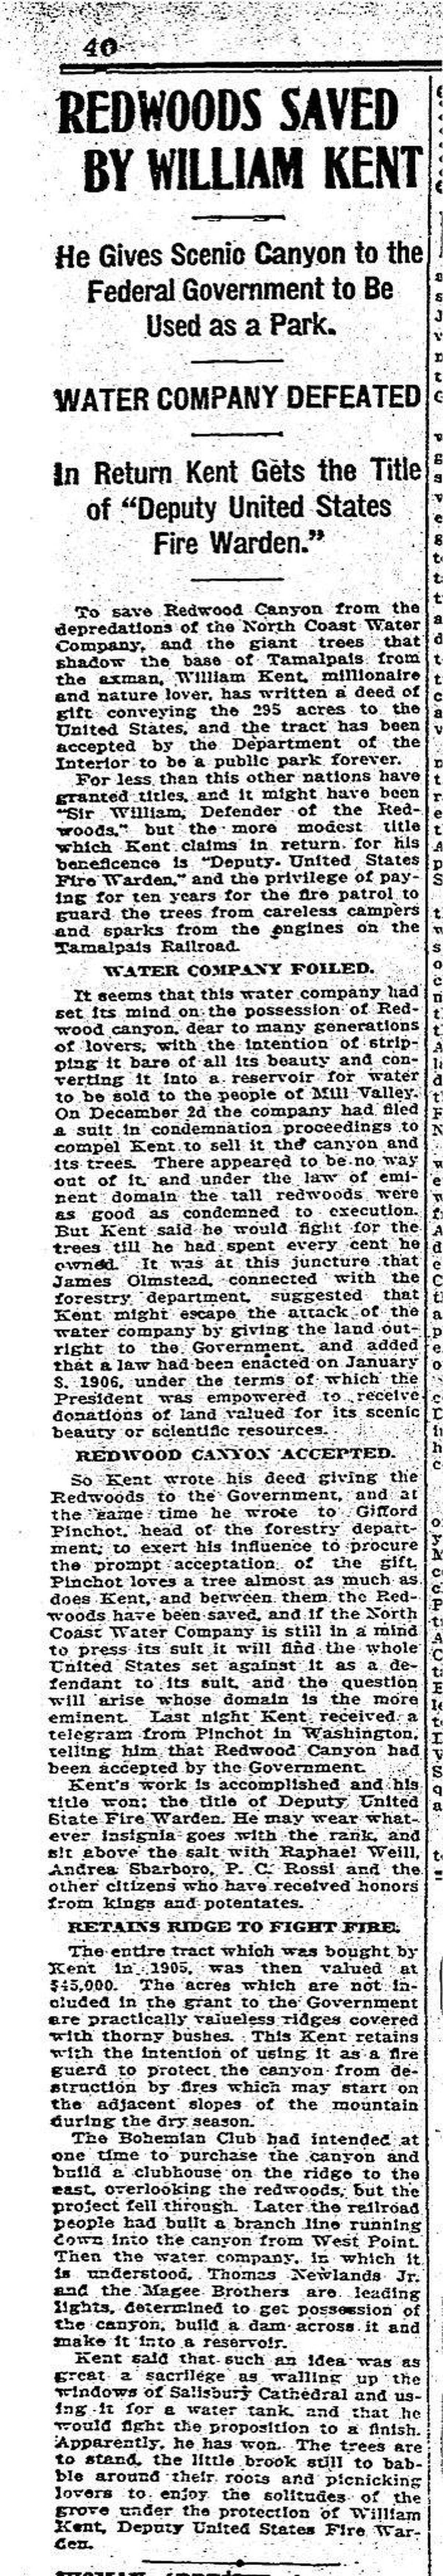 January 5, 1908 Chronicle article on William Kent donating Muir Woods